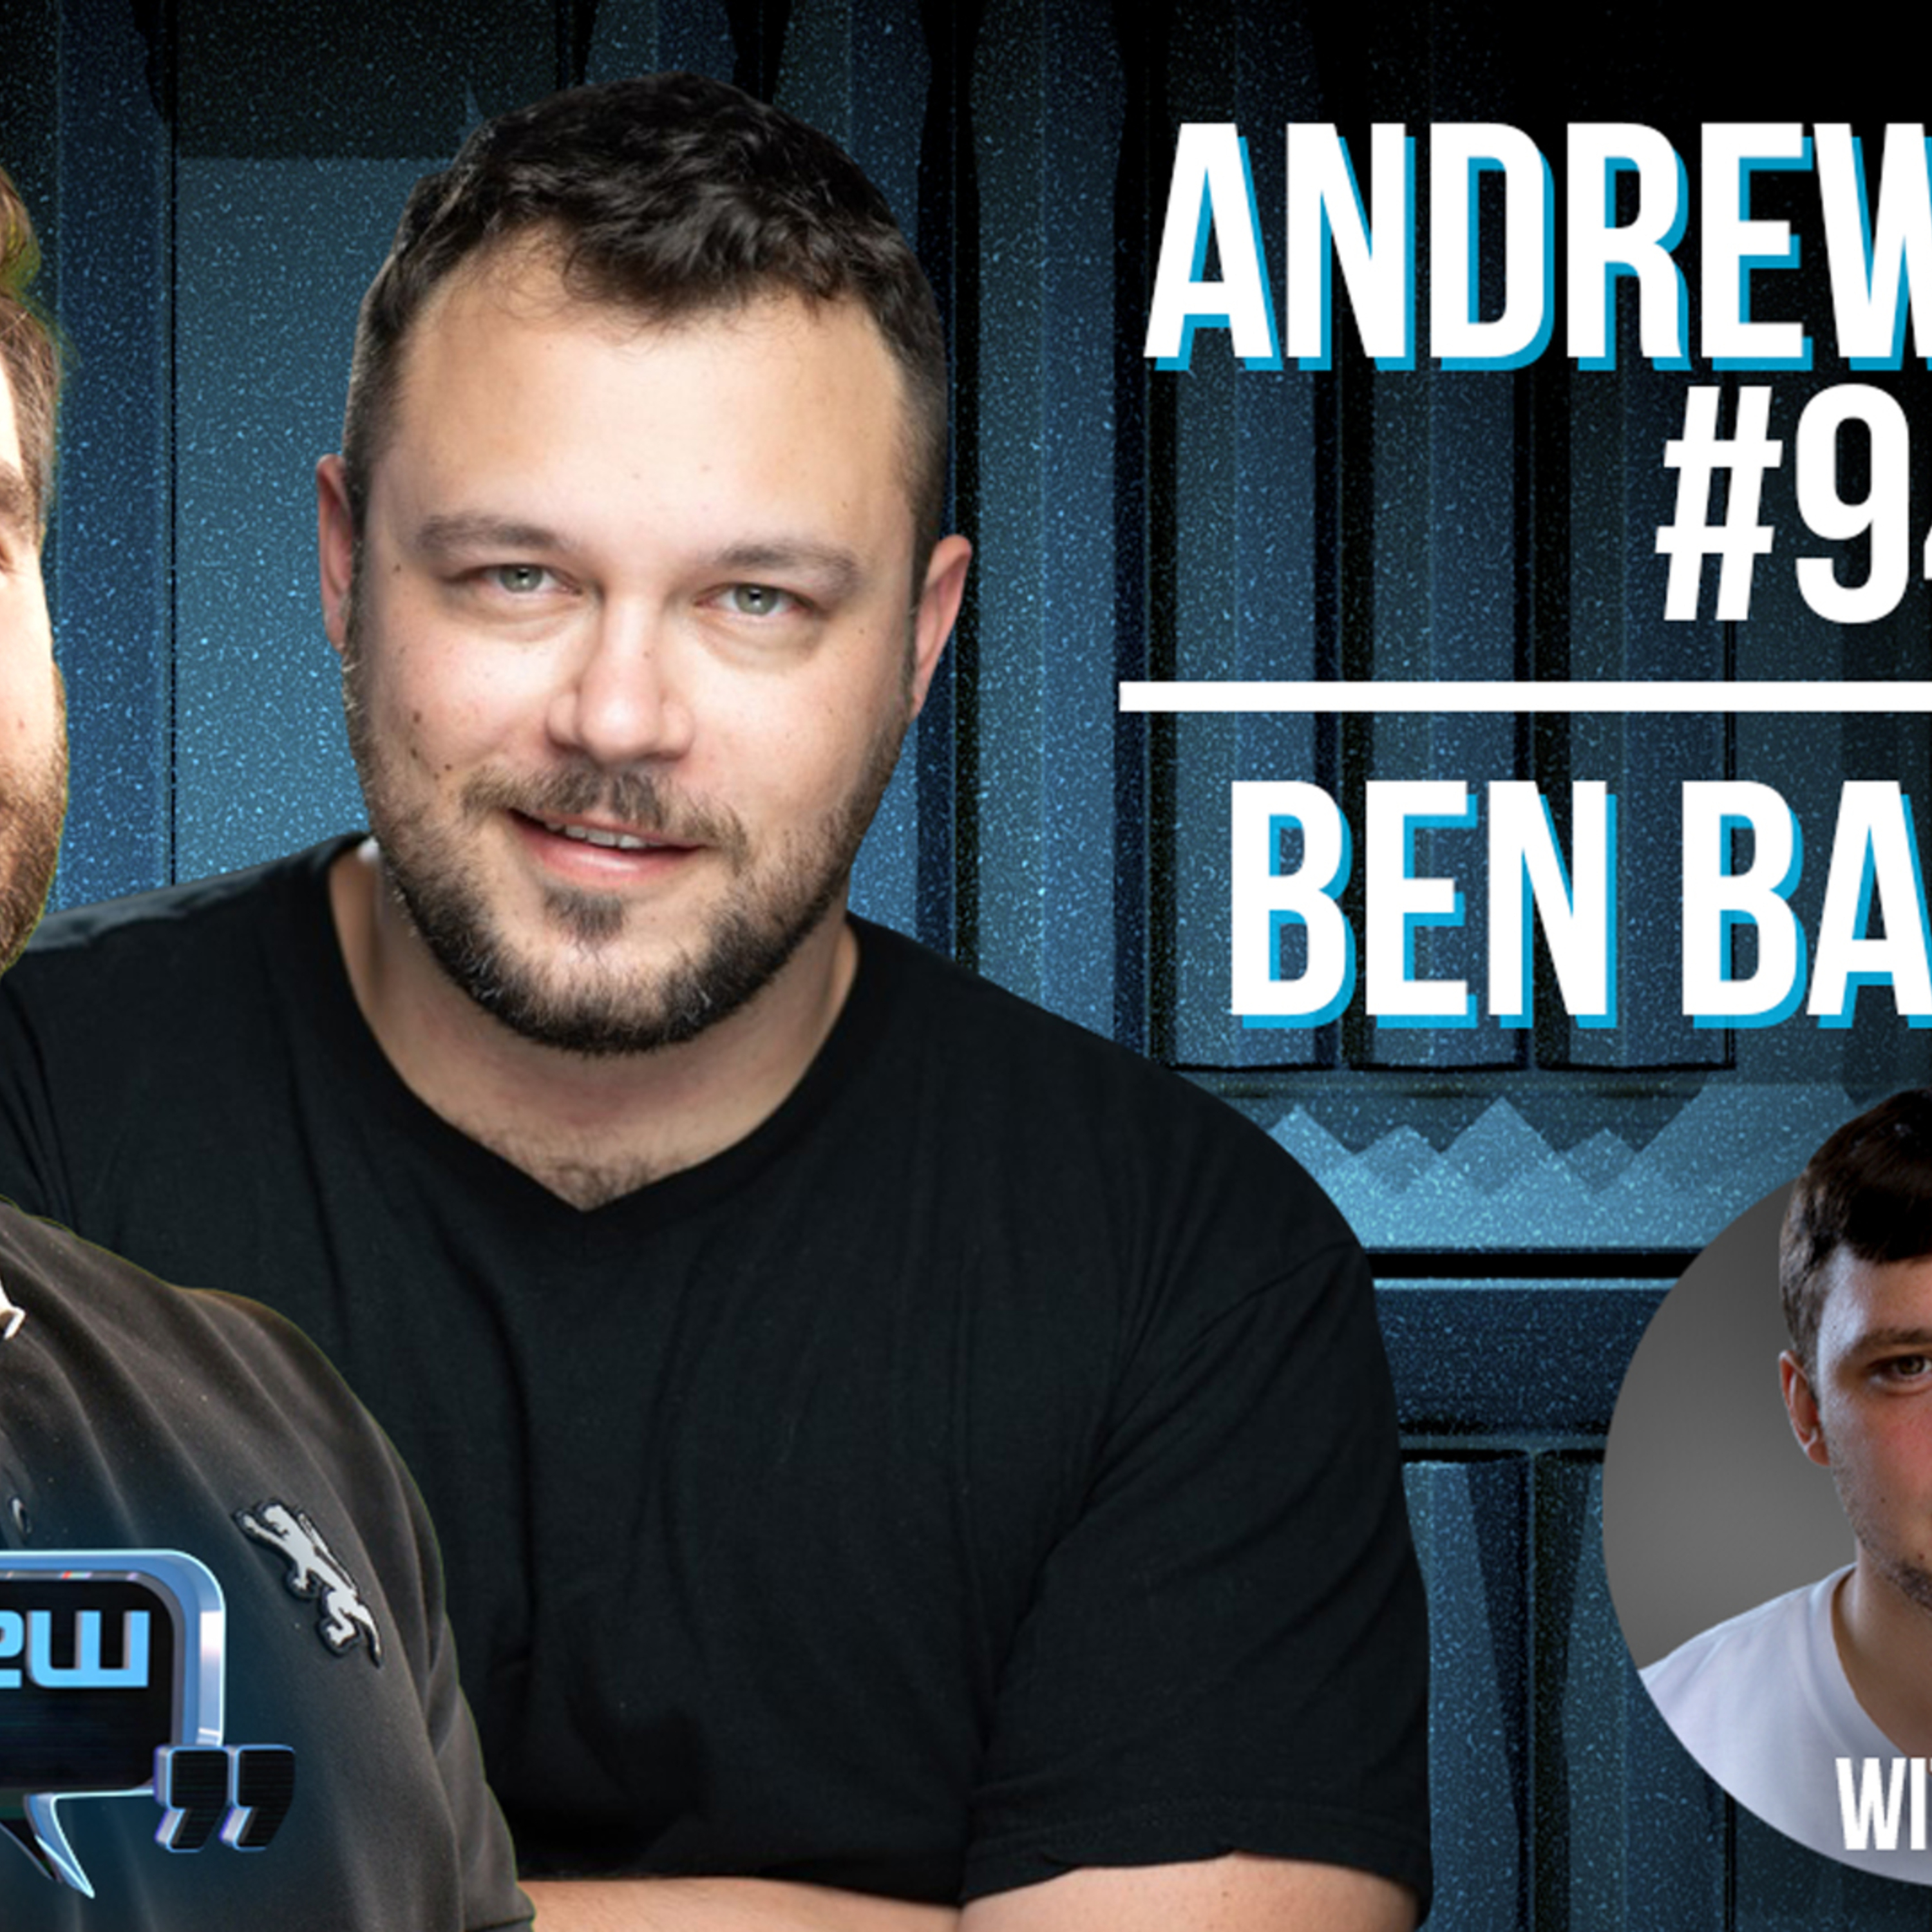 Who is Theresa Tam? | Ben Bankas | Andrew Says 94